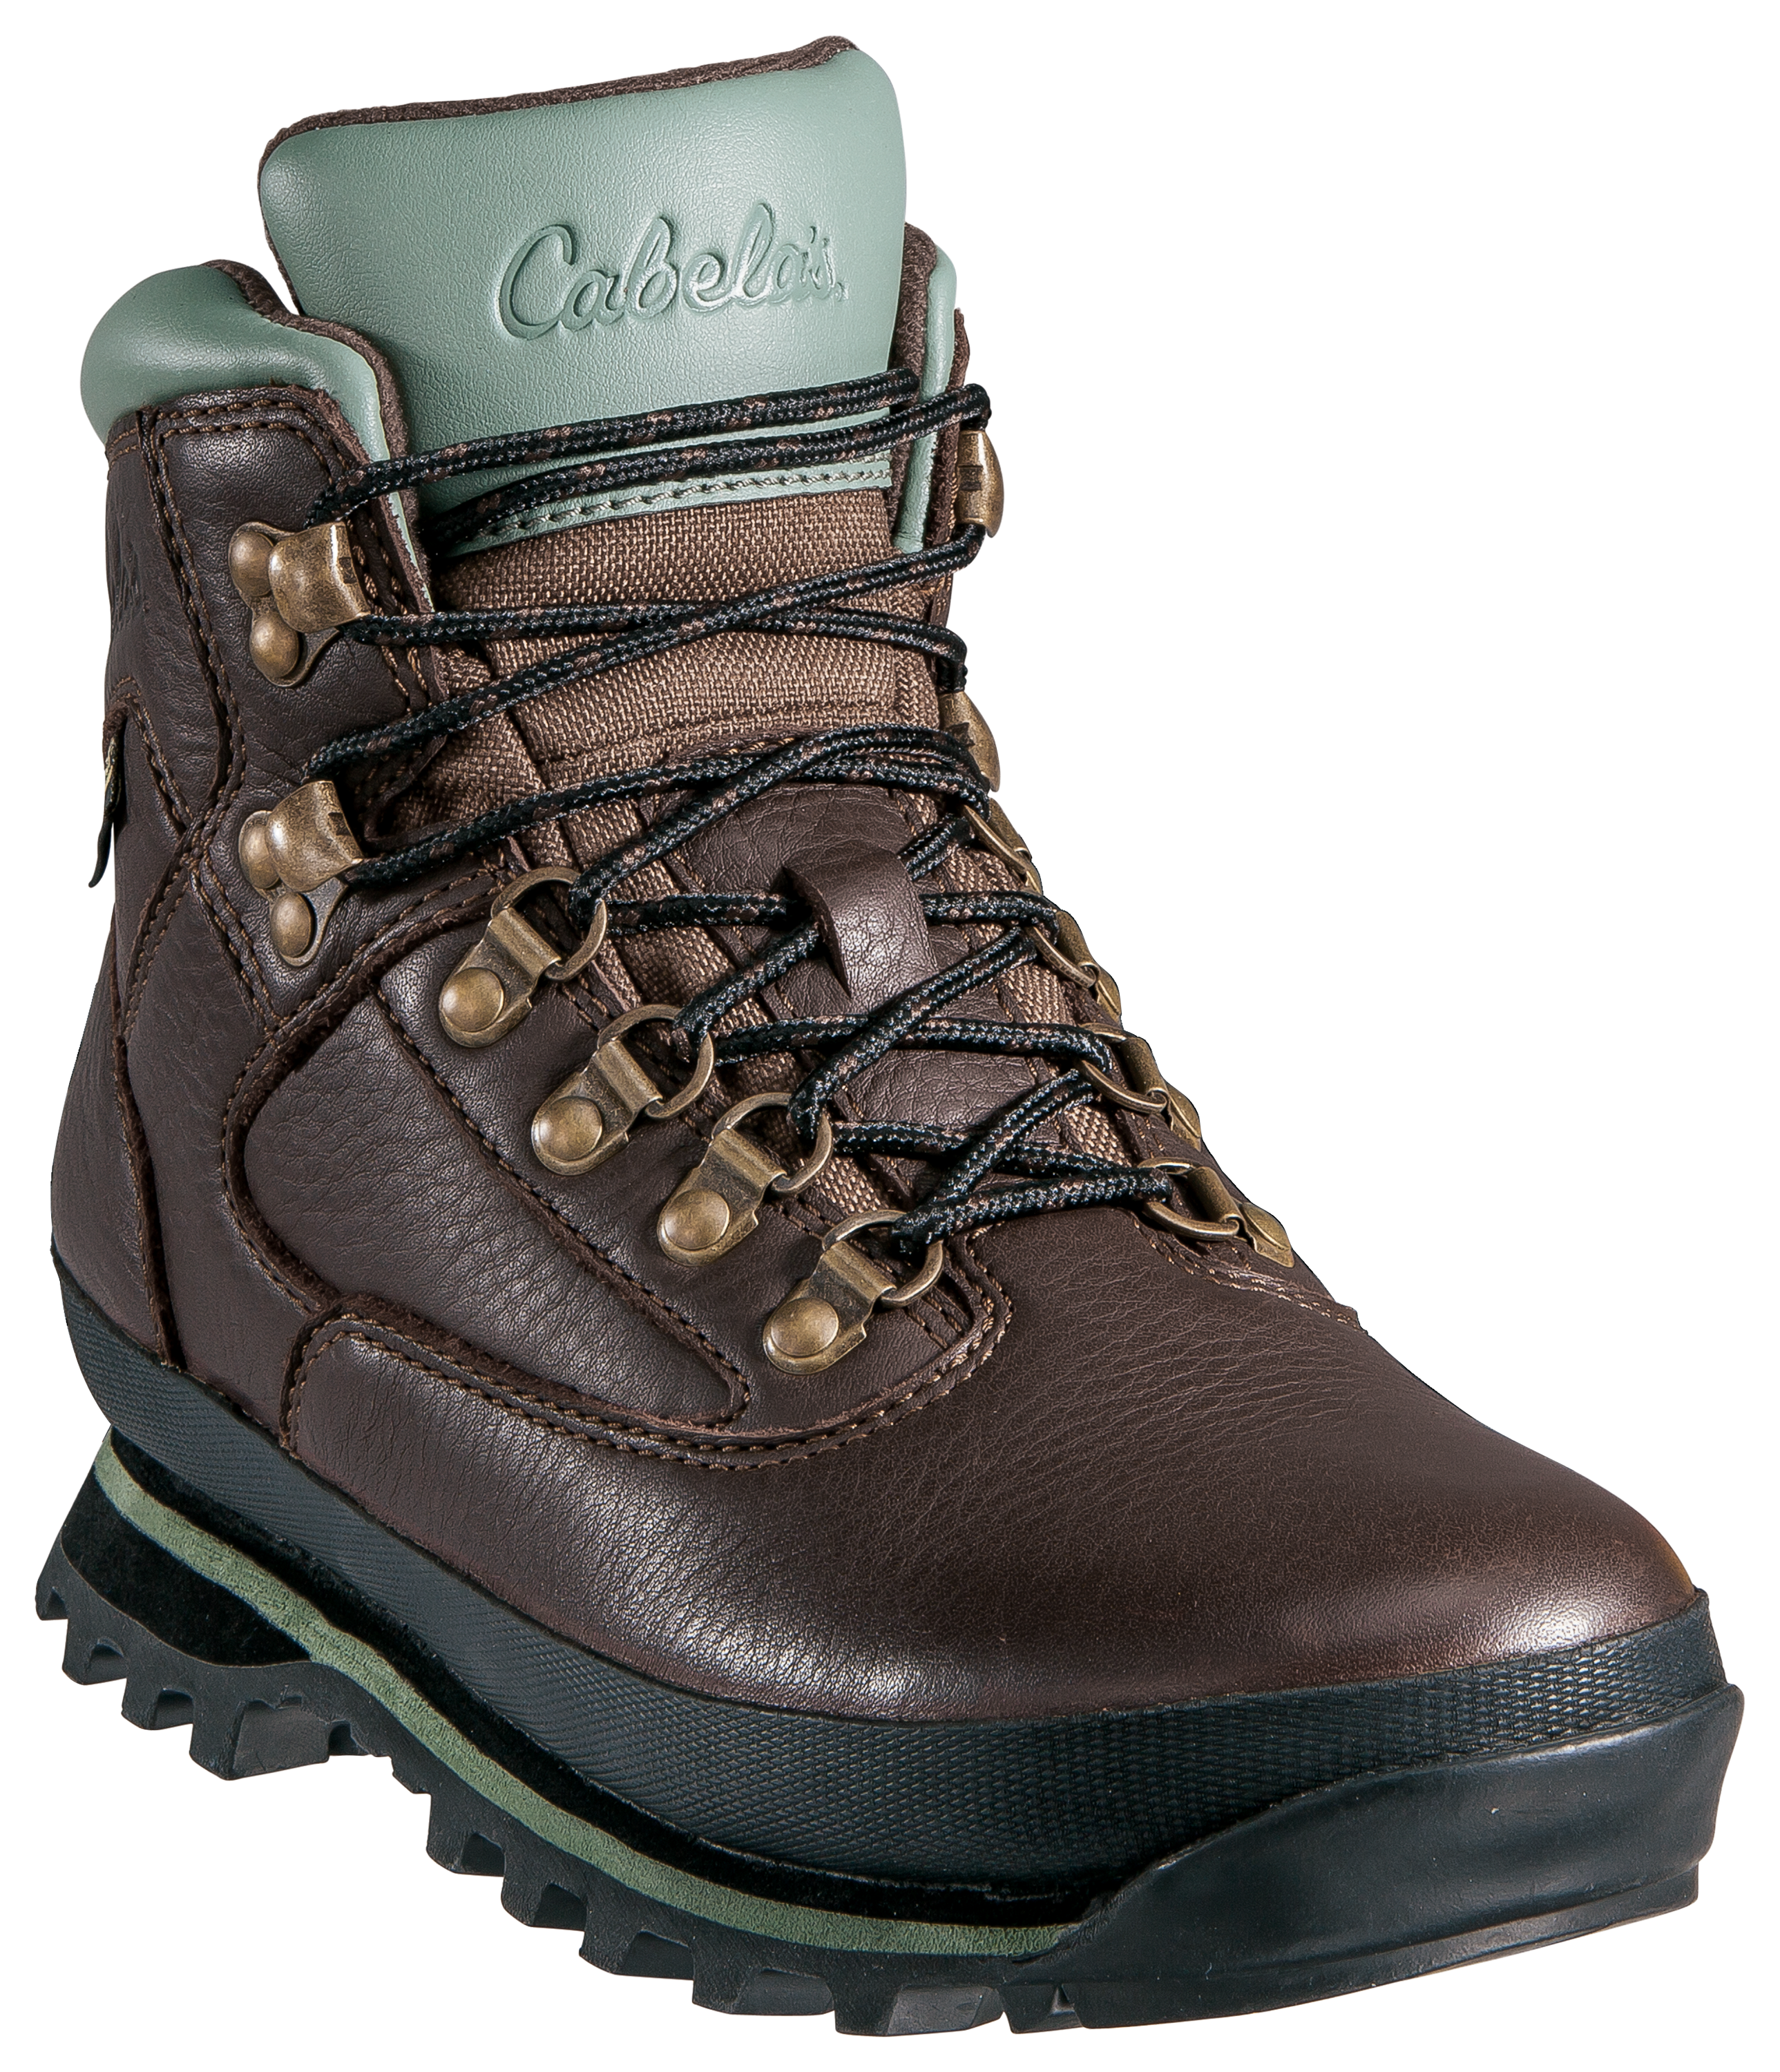 Cabela's Rimrock Mid GORE-TEX Hiking Boots for Ladies - Brown - 8.5 M